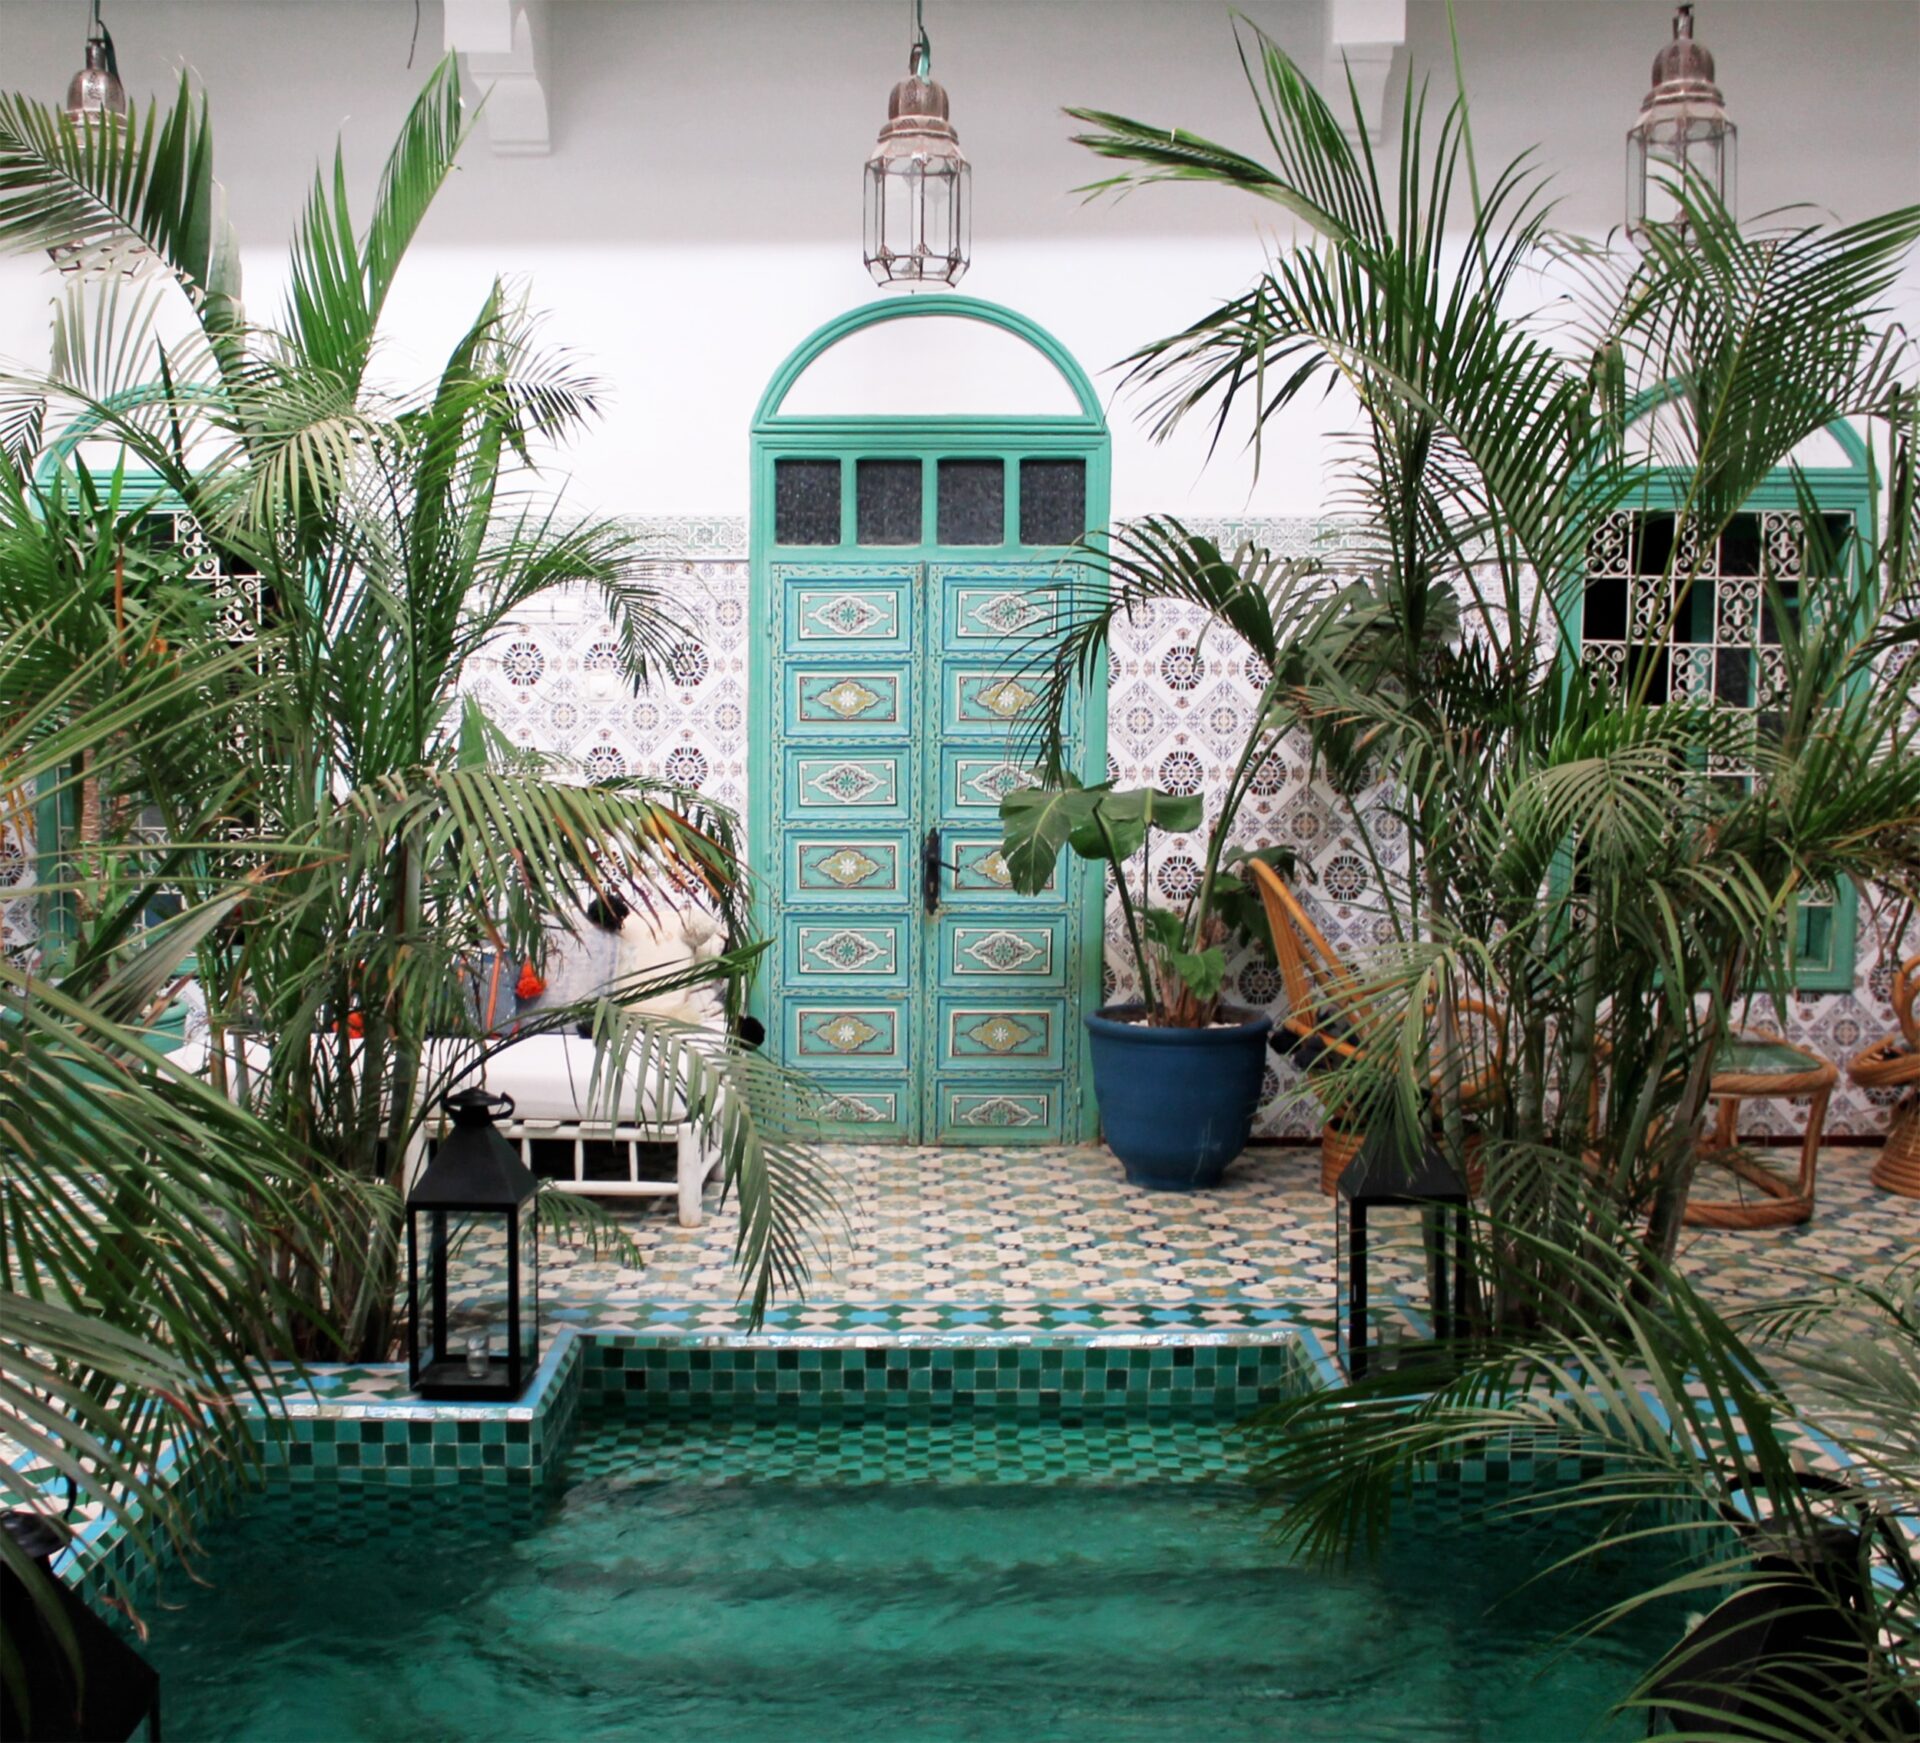 Terrace-Moroccan-inspired-Riad-Moroccan-Real-Dream-House